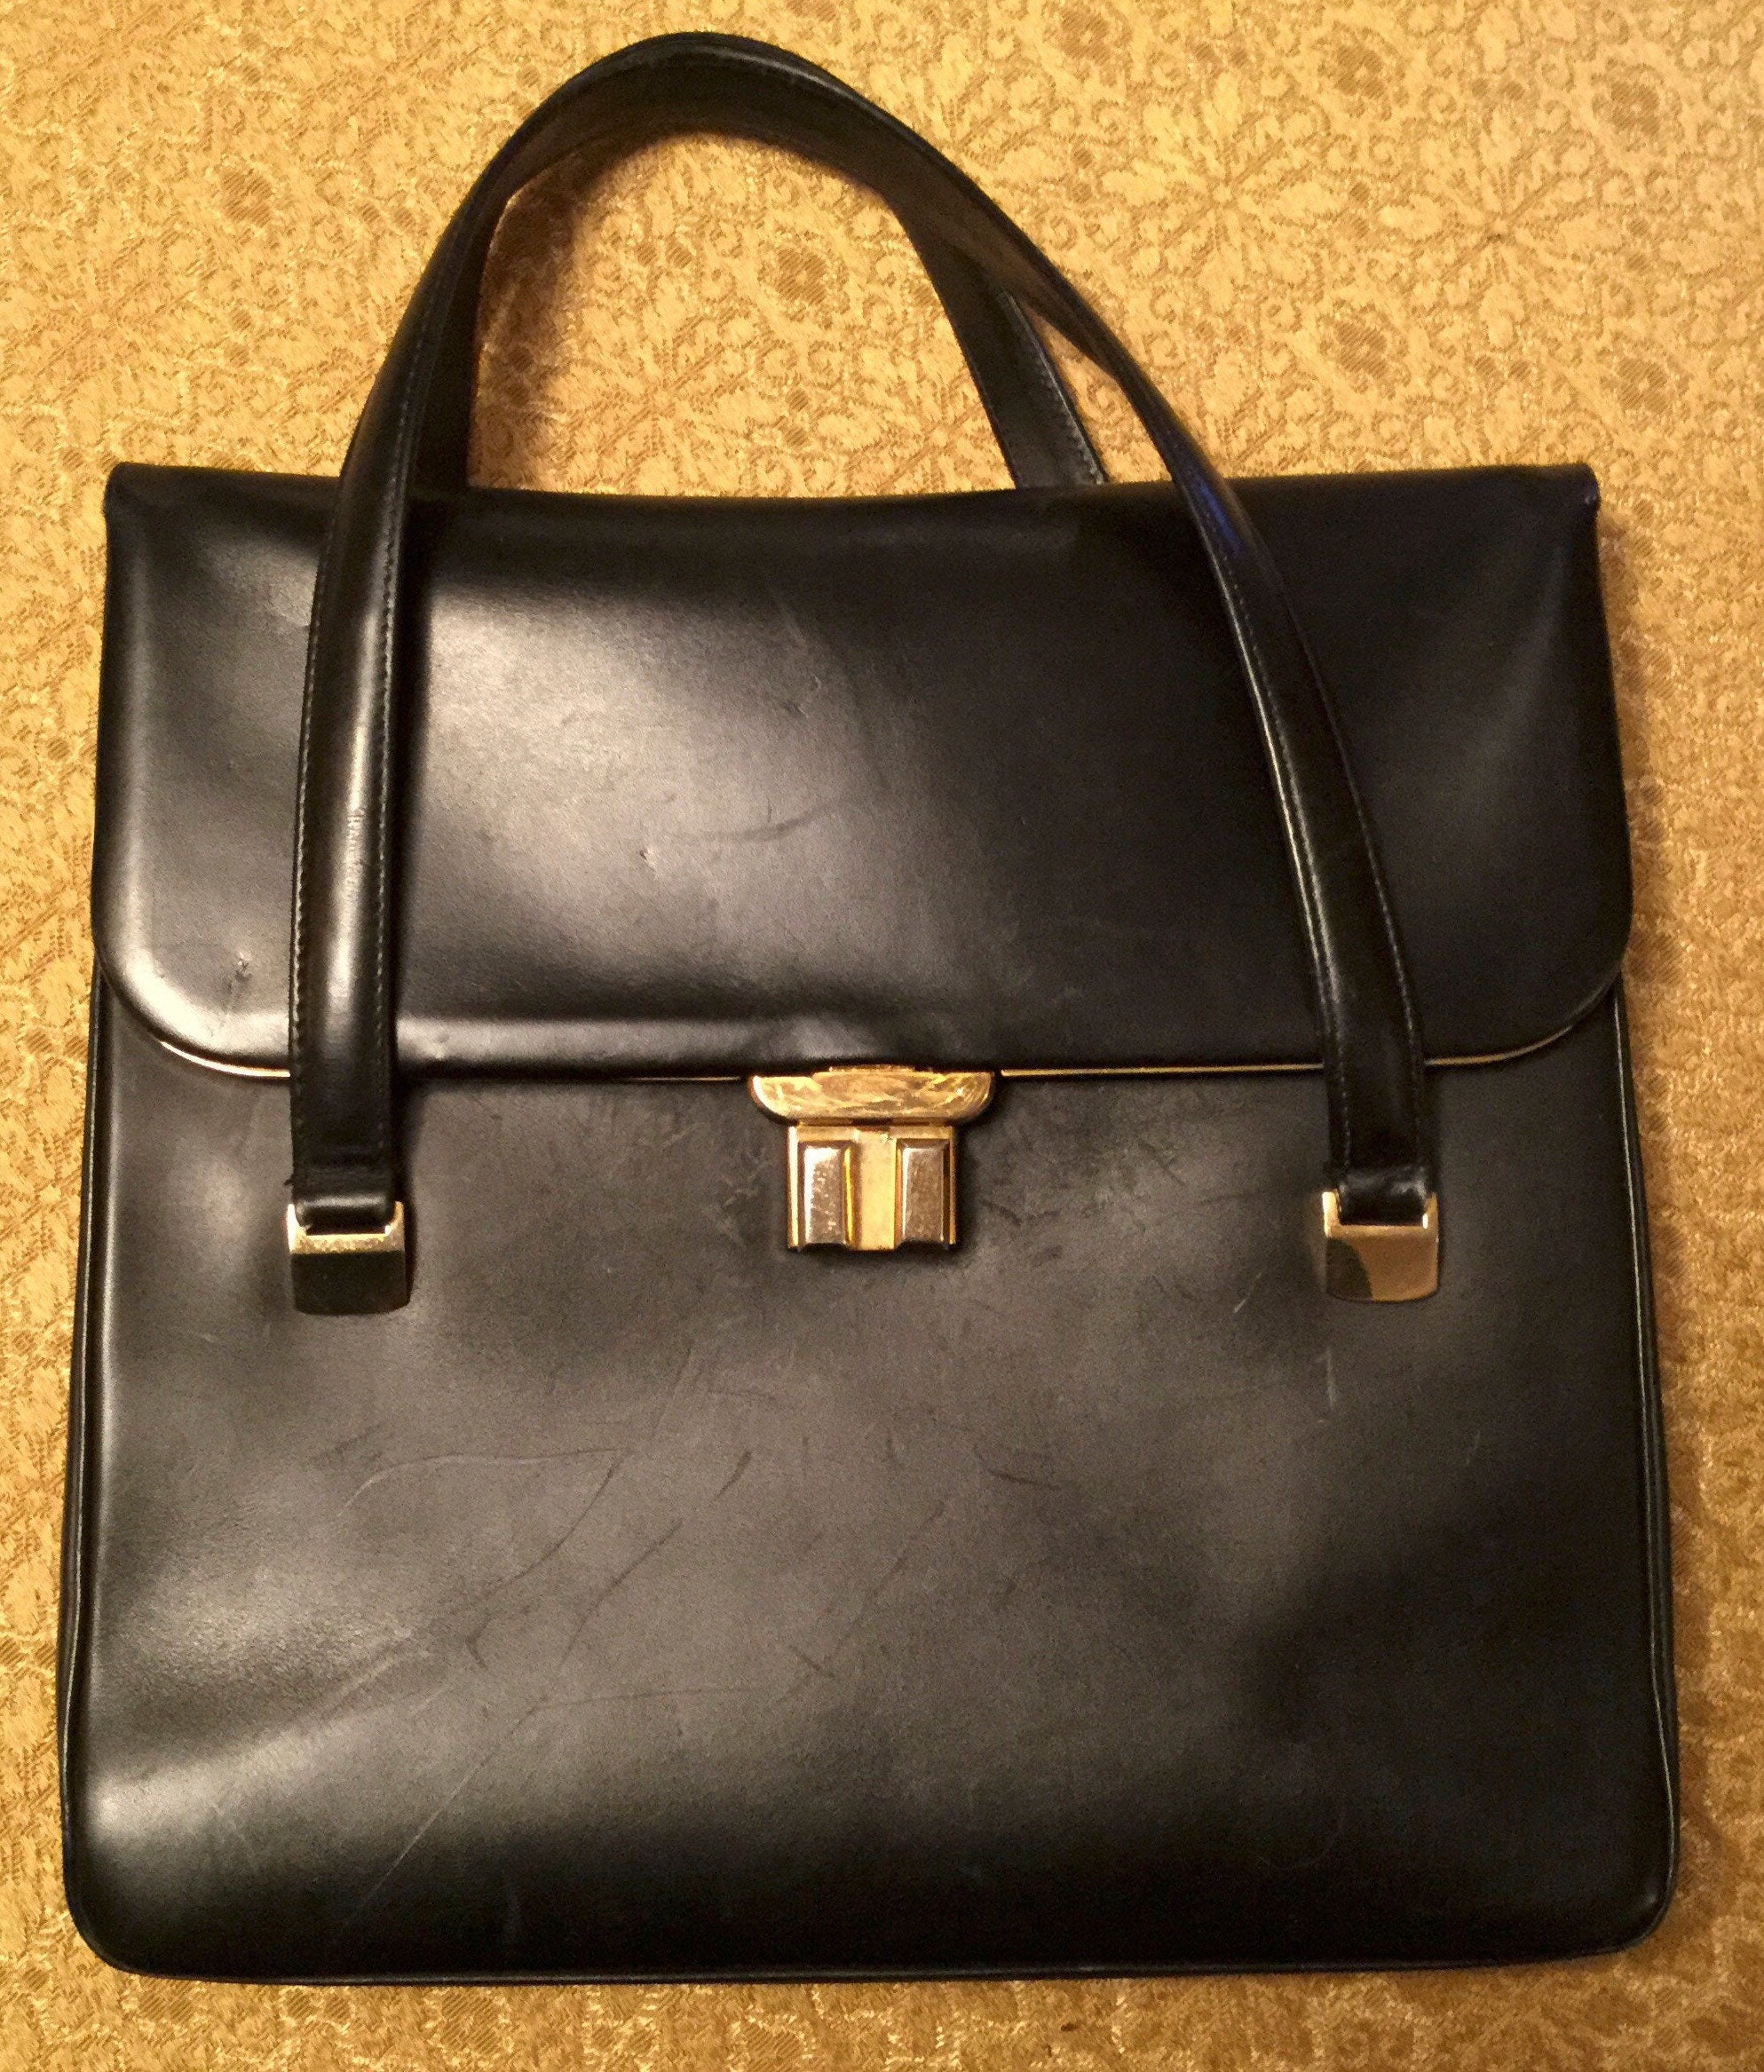 Gucci Rare Vintage 1950's Black Leather Handbag with Red Leather